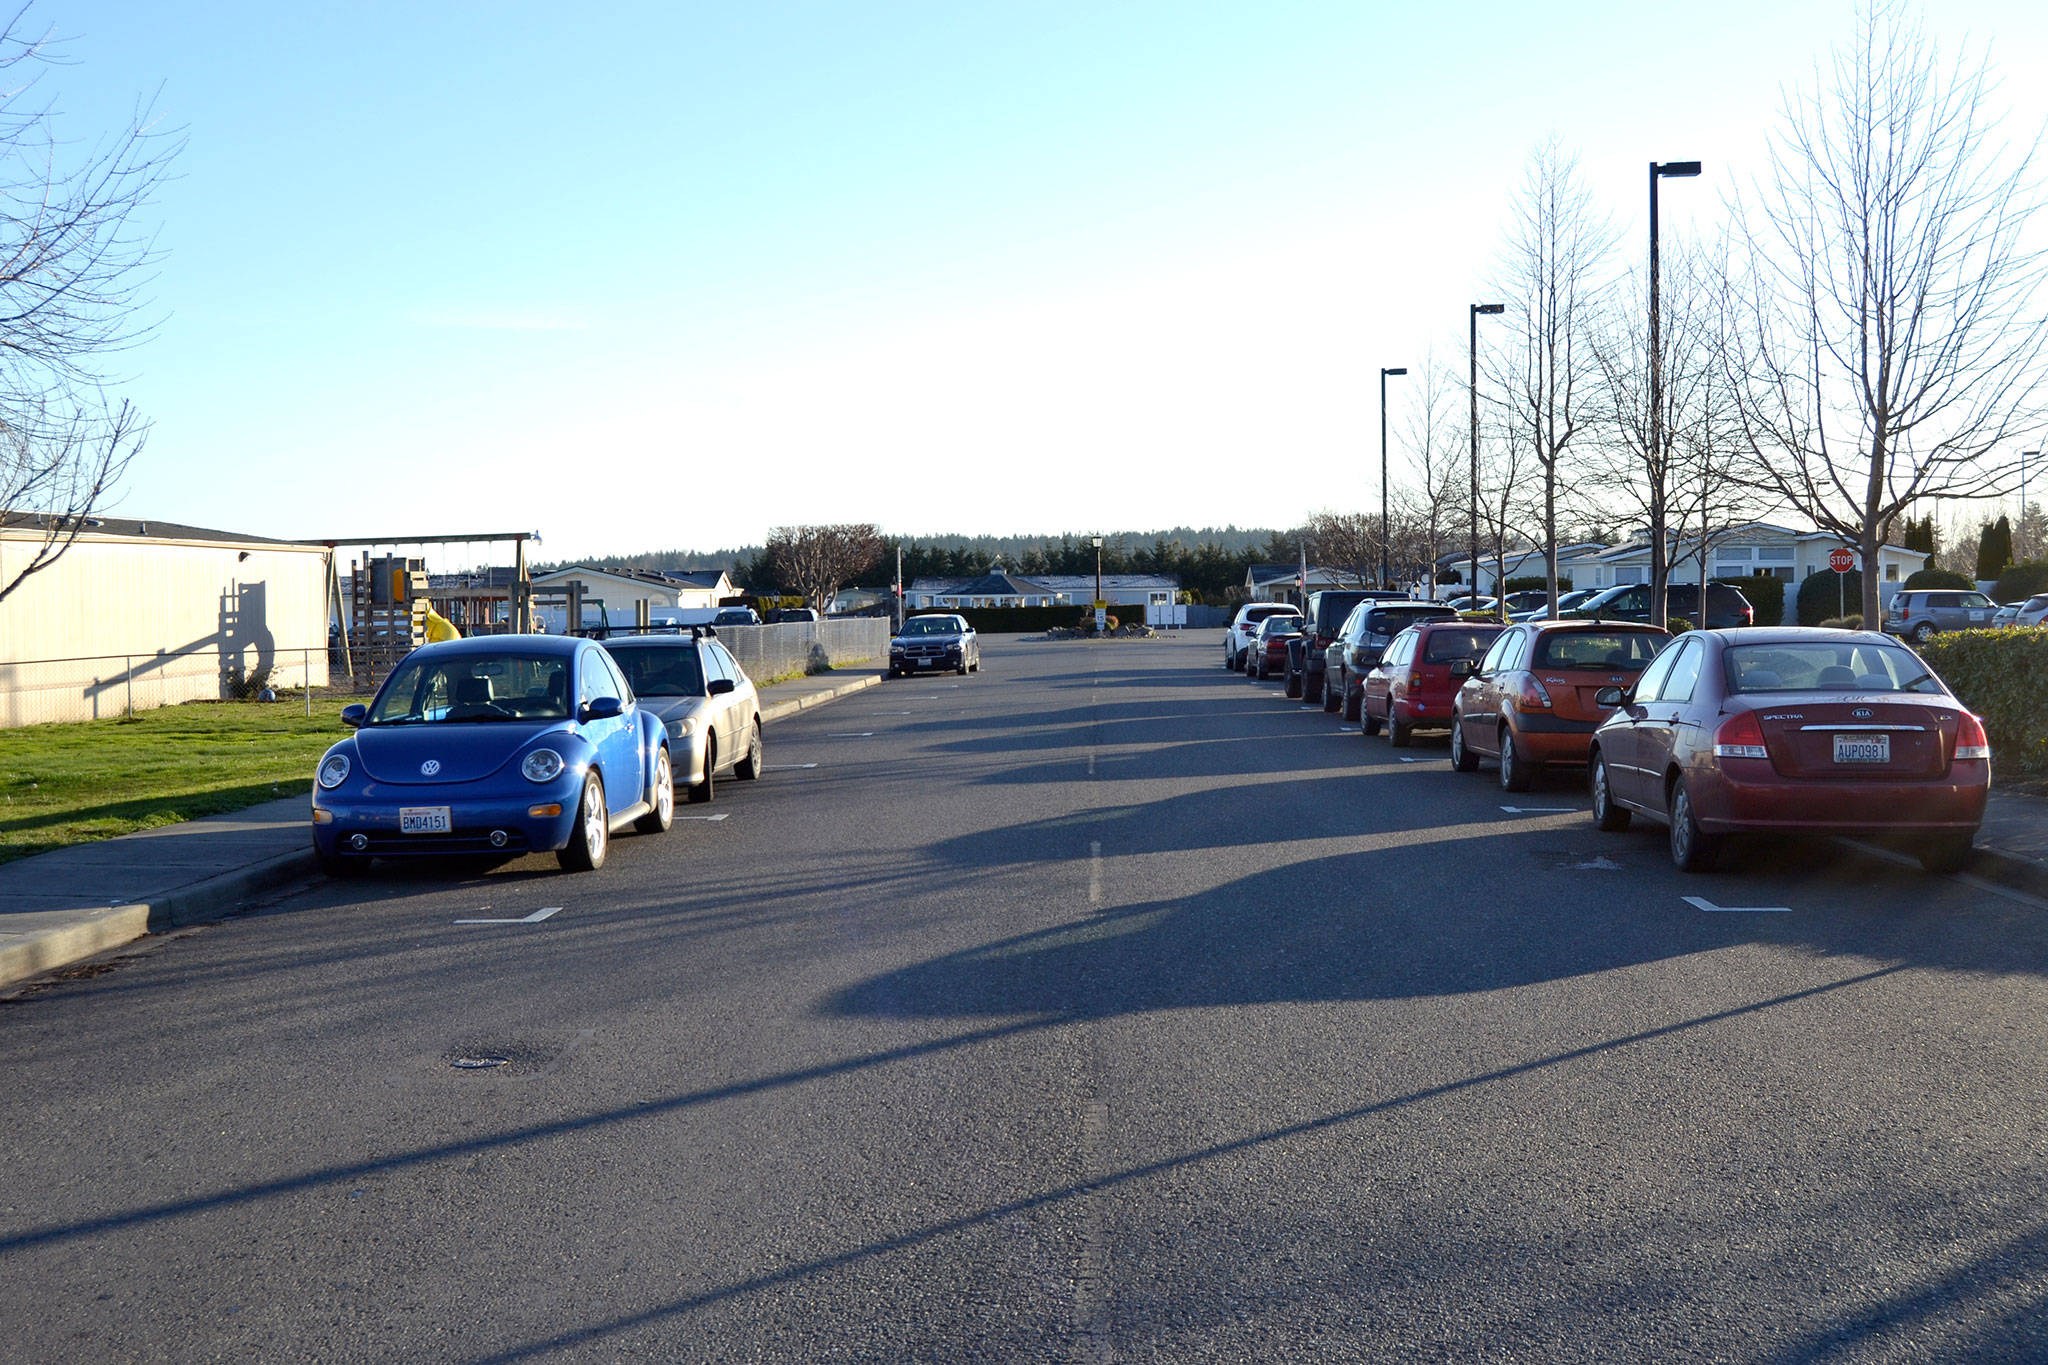 In the next week, parking will no longer be permitted on the north side of Cape Hope Way (seen on the left) after City Councilors asked Sequim city staff to remove parking after concerns from nearby residents. Sequim Gazette photo by Matthew Nash